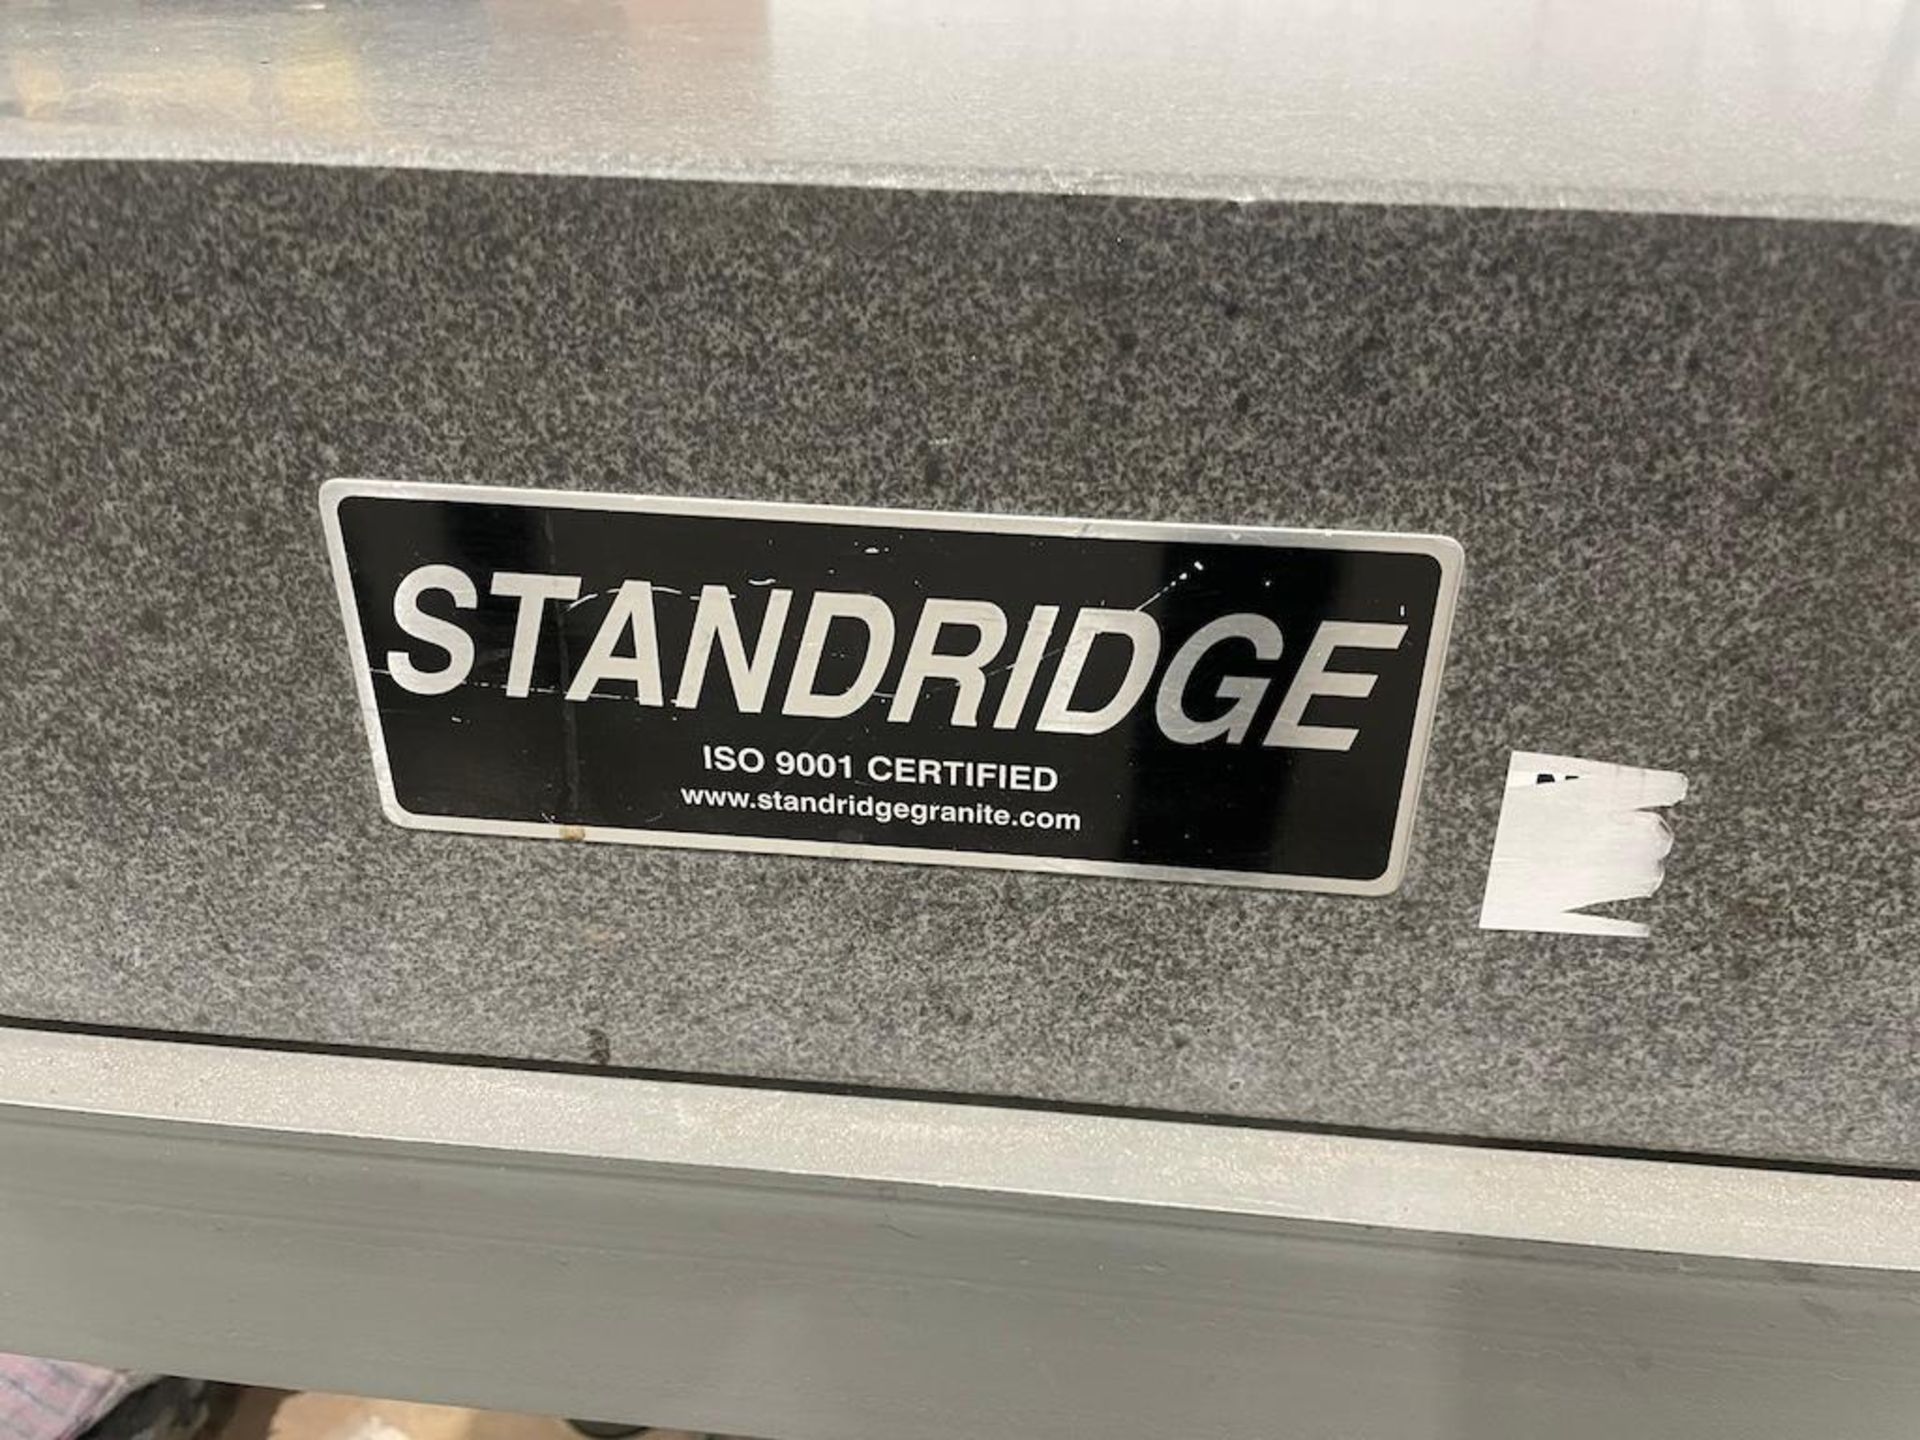 STANDRIDGE GRANITE PRECISION PLATE 48 X 36 X 6 IN, ON PORTABLE STEEL FRAME [TROIS RIVIERES] *PLEASE - Image 2 of 3